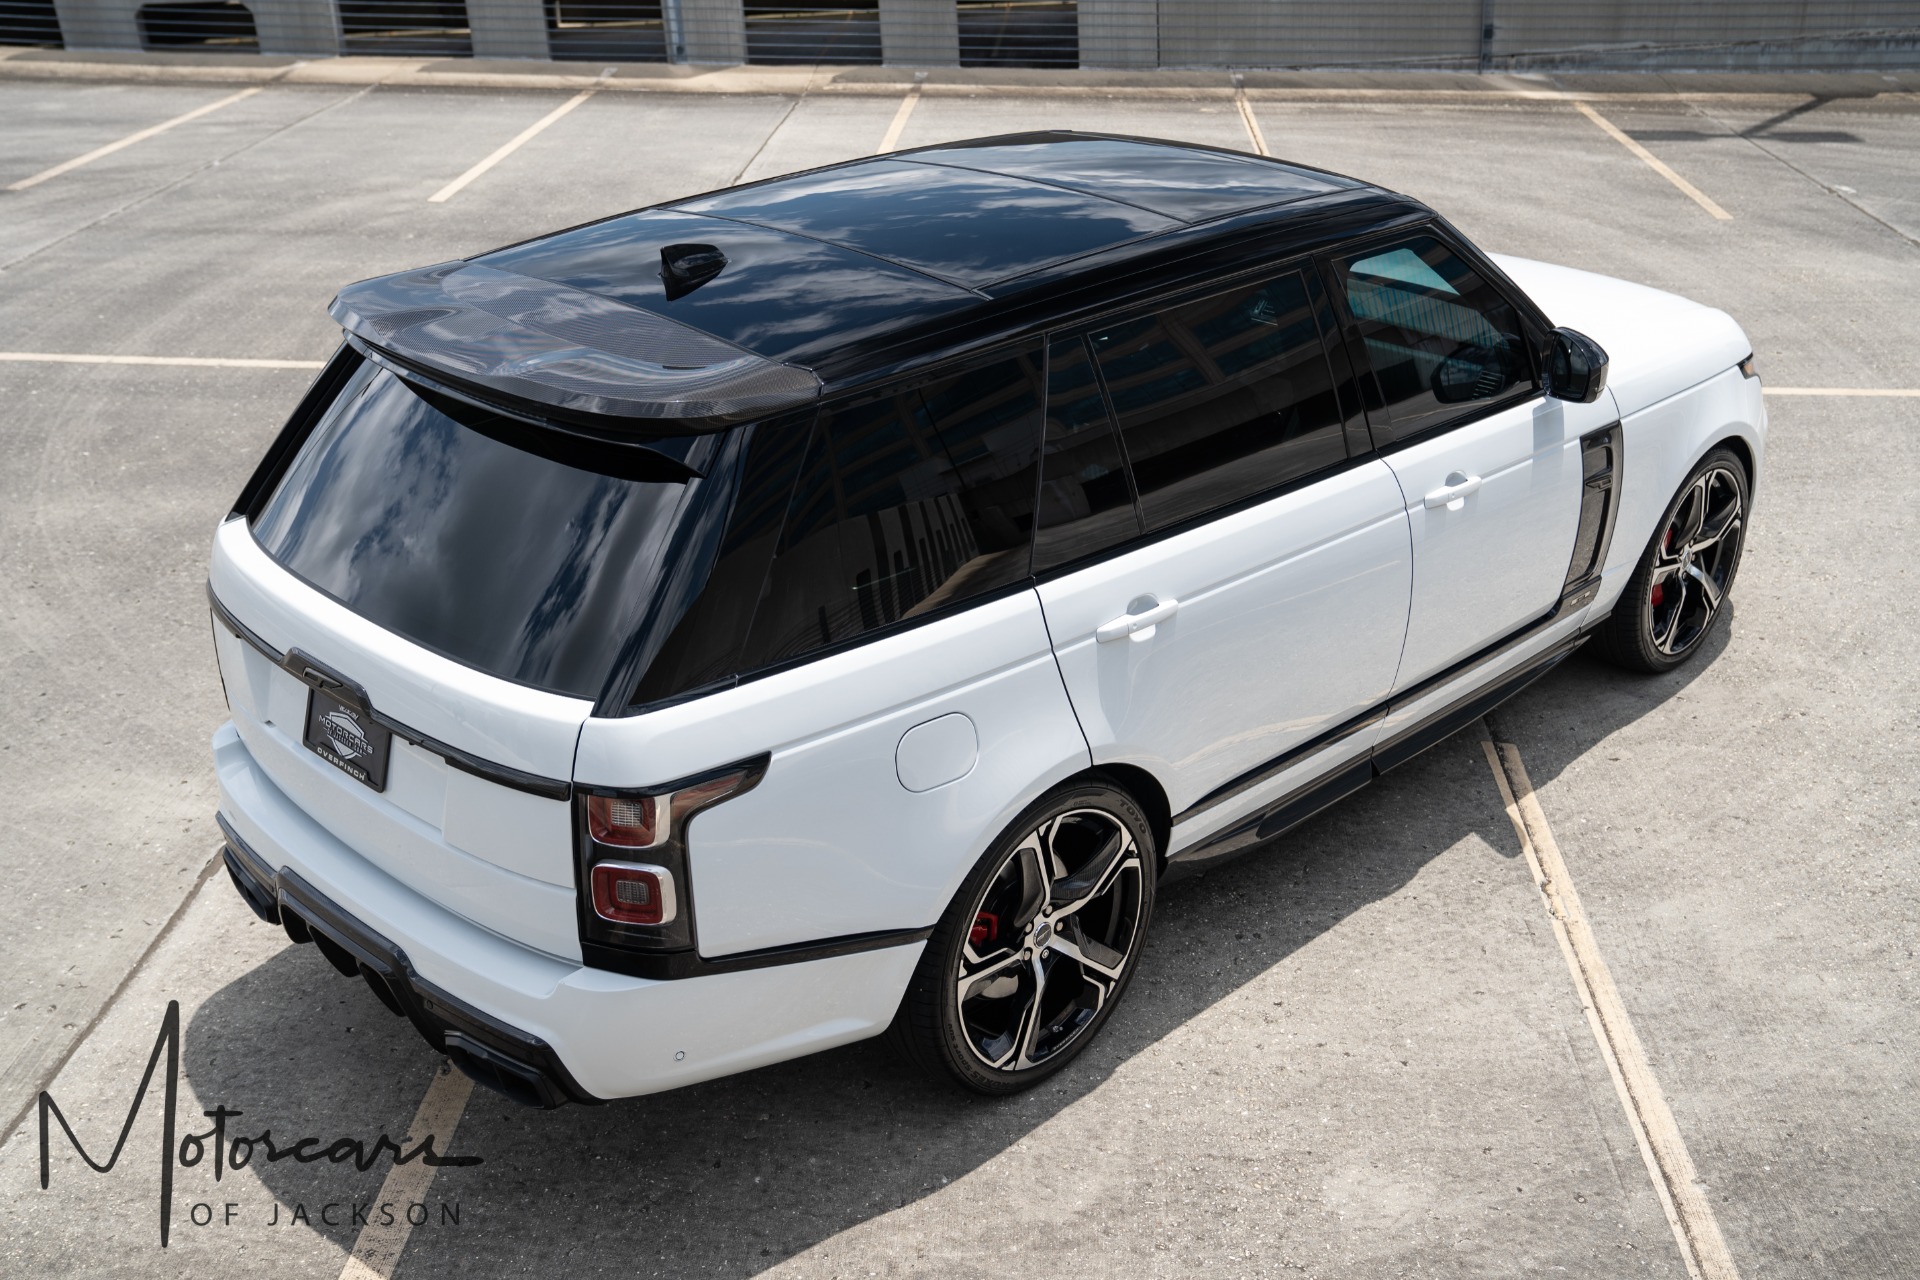 Used-2021-Land-Rover-Range-Rover-OVERFINCH-LWB-V8-Supercharged-for-sale-Jackson-MS